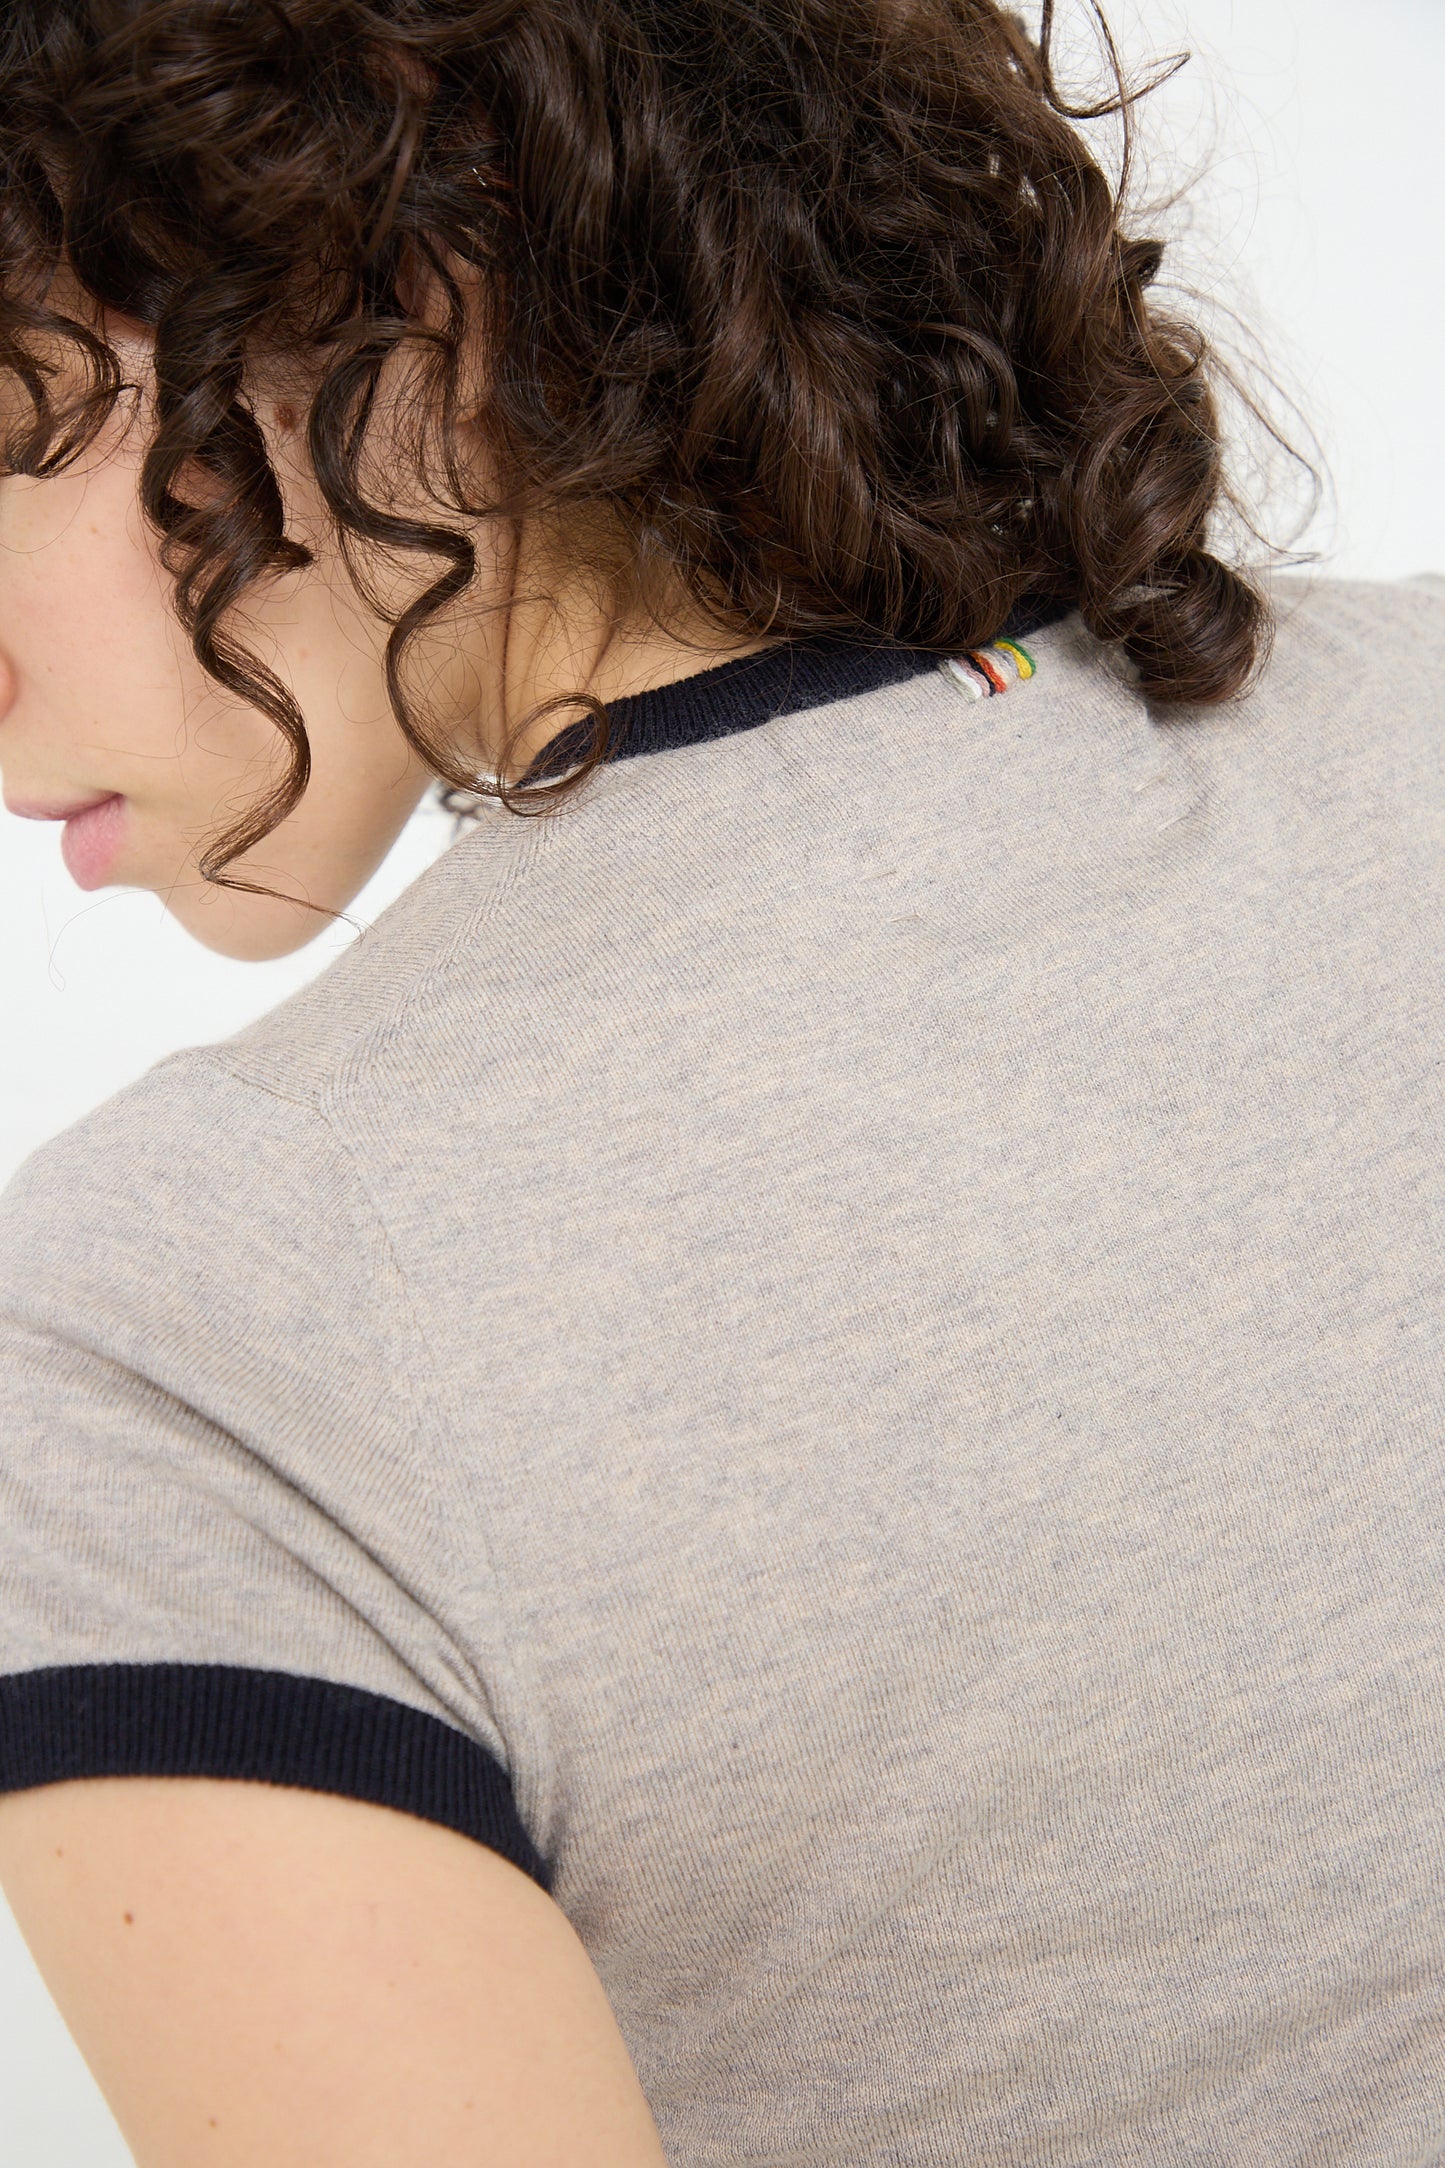 A woman wearing an Extreme Cashmere Cotton Cashmere No. 339 Chloe Tee in Gray/Navy is seen from the back.